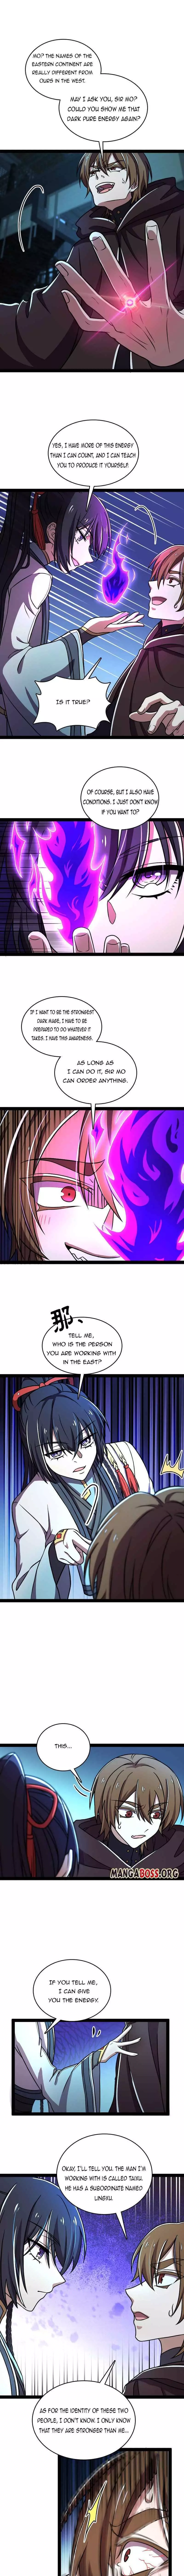 The Martial Emperor's Life After Seclusion - 137 page 5-fe5b77e0